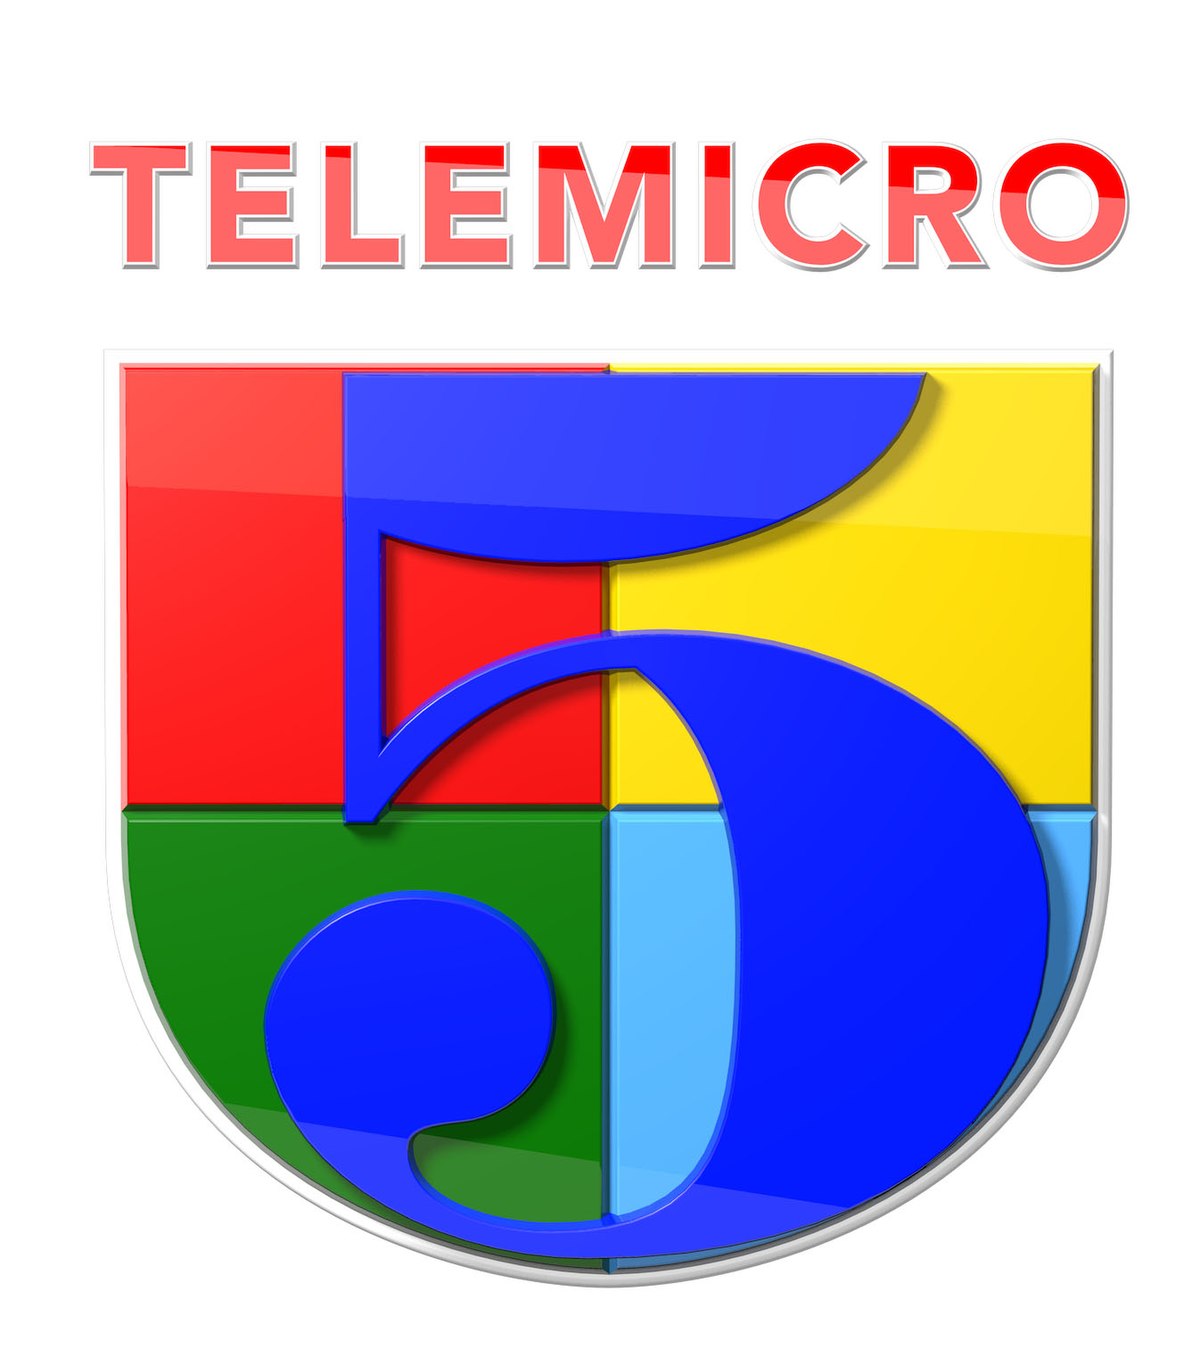 carol paiva recommends www telemicro canal 5 en vivo pic